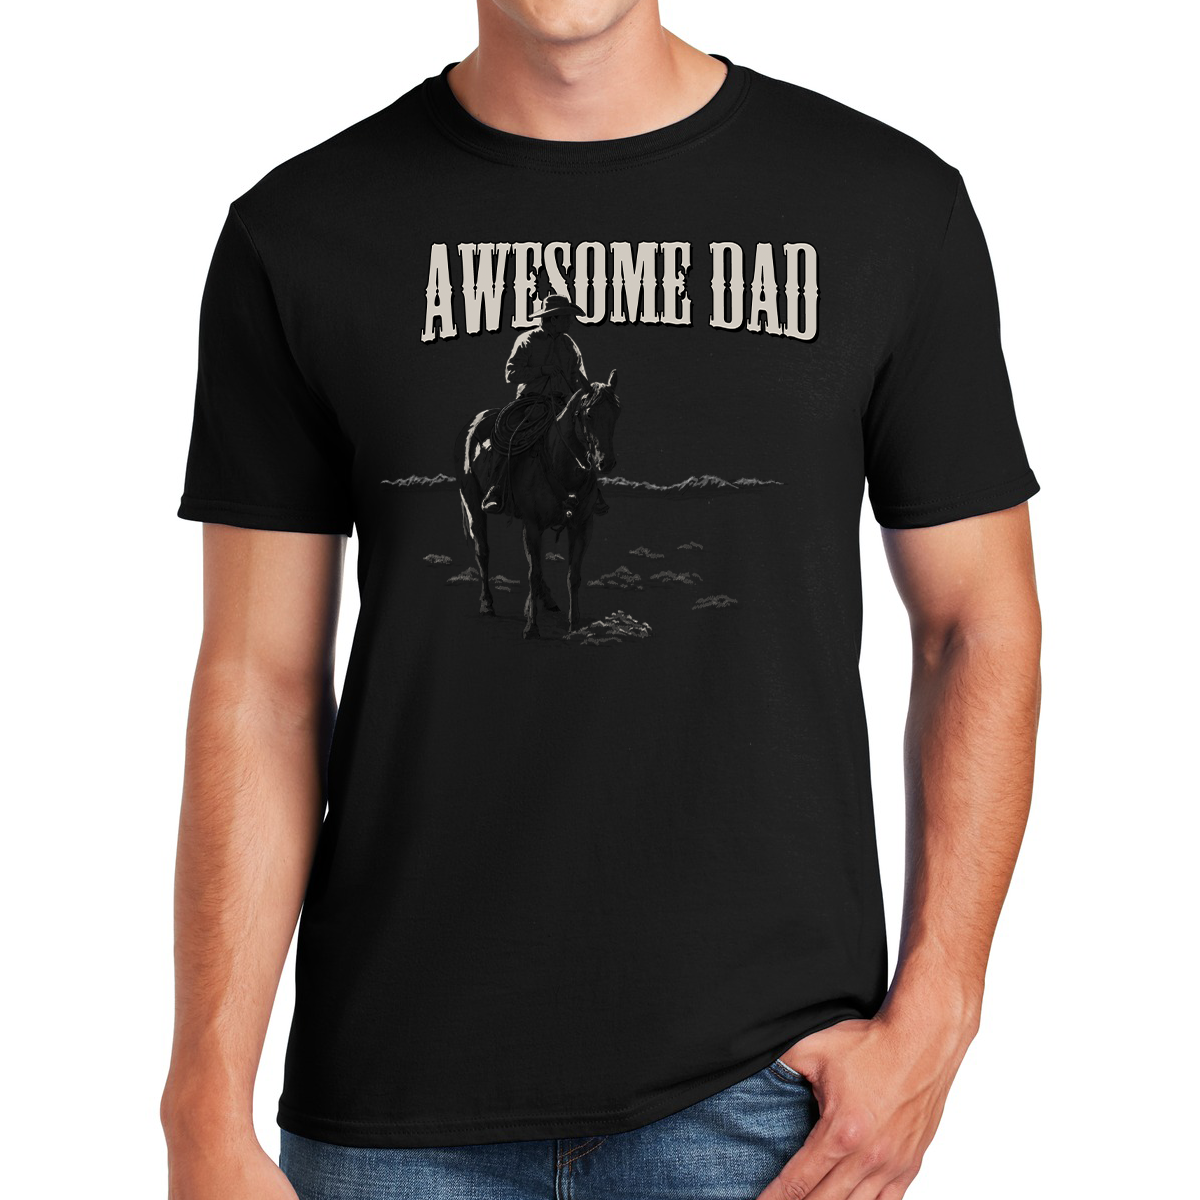 Awesome Dad Cowboy Wrangling Love And Adventures In Fatherhood Gift For Dads T-shirt